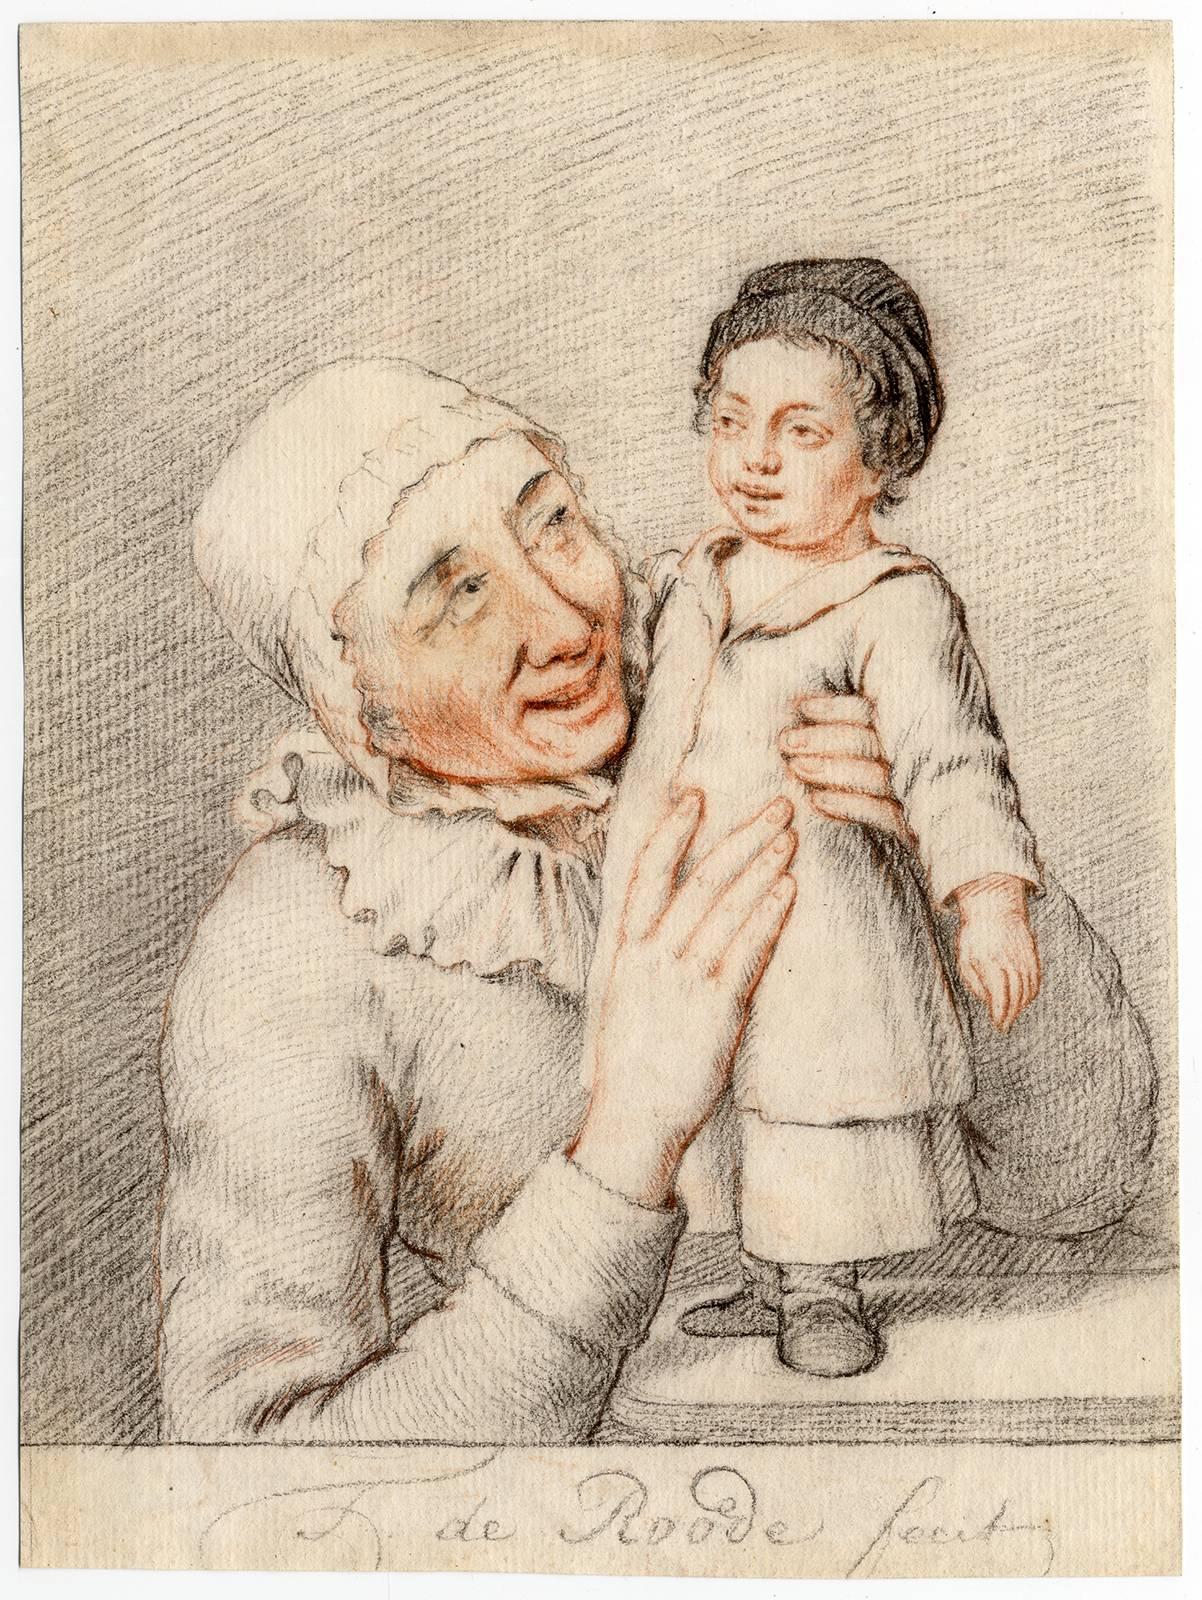 Theodorus de Roode Figurative Art - Untitled - Grandmother smiling at a (grand)child.